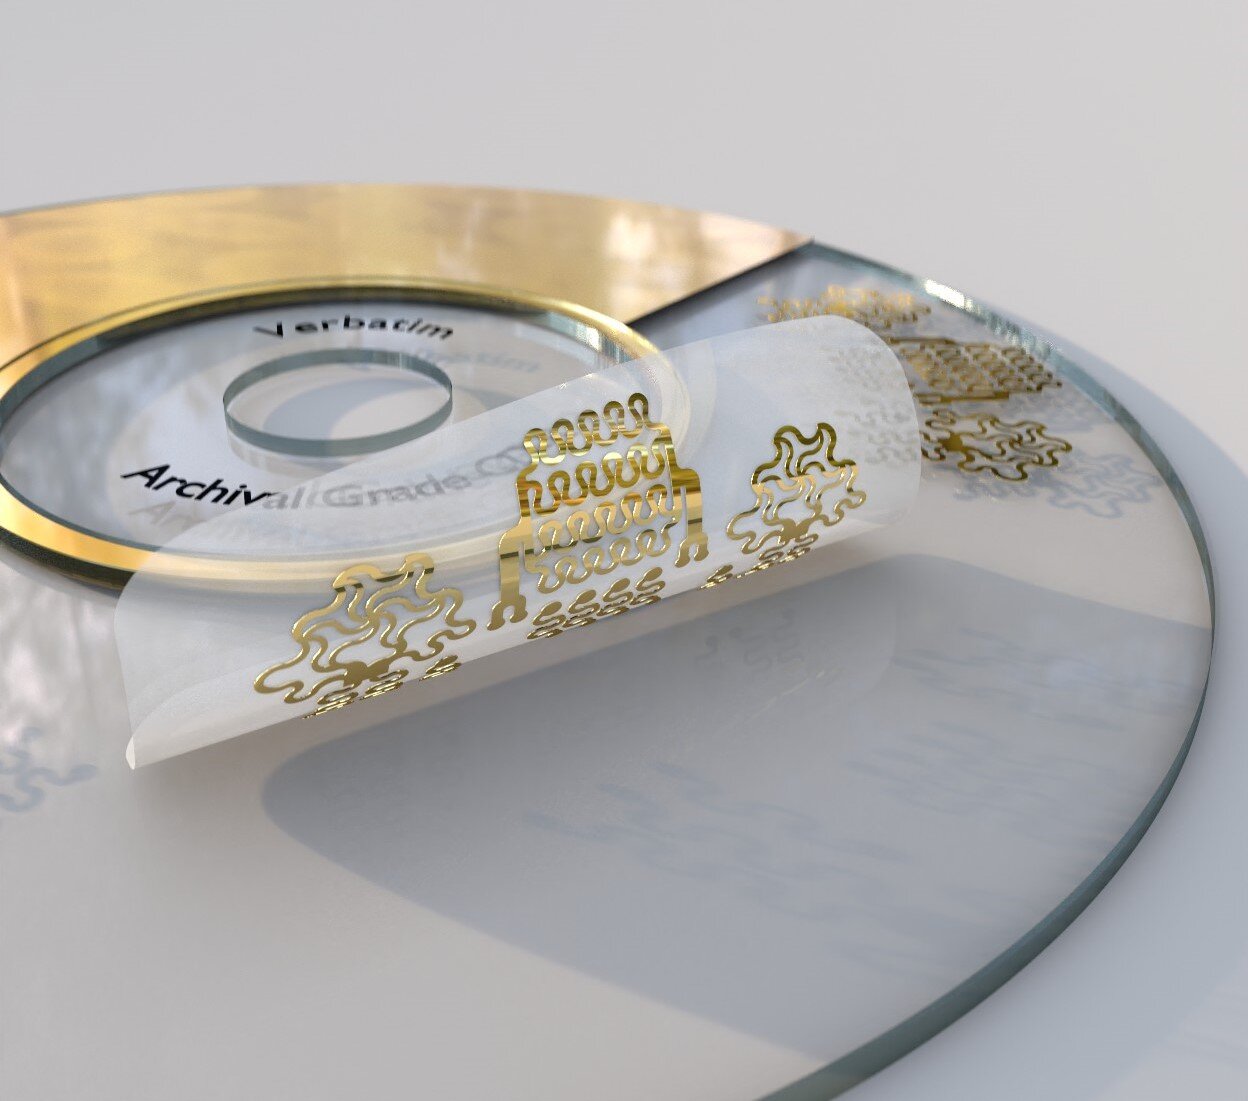 Researchers recycle CDs into flexible biosensors